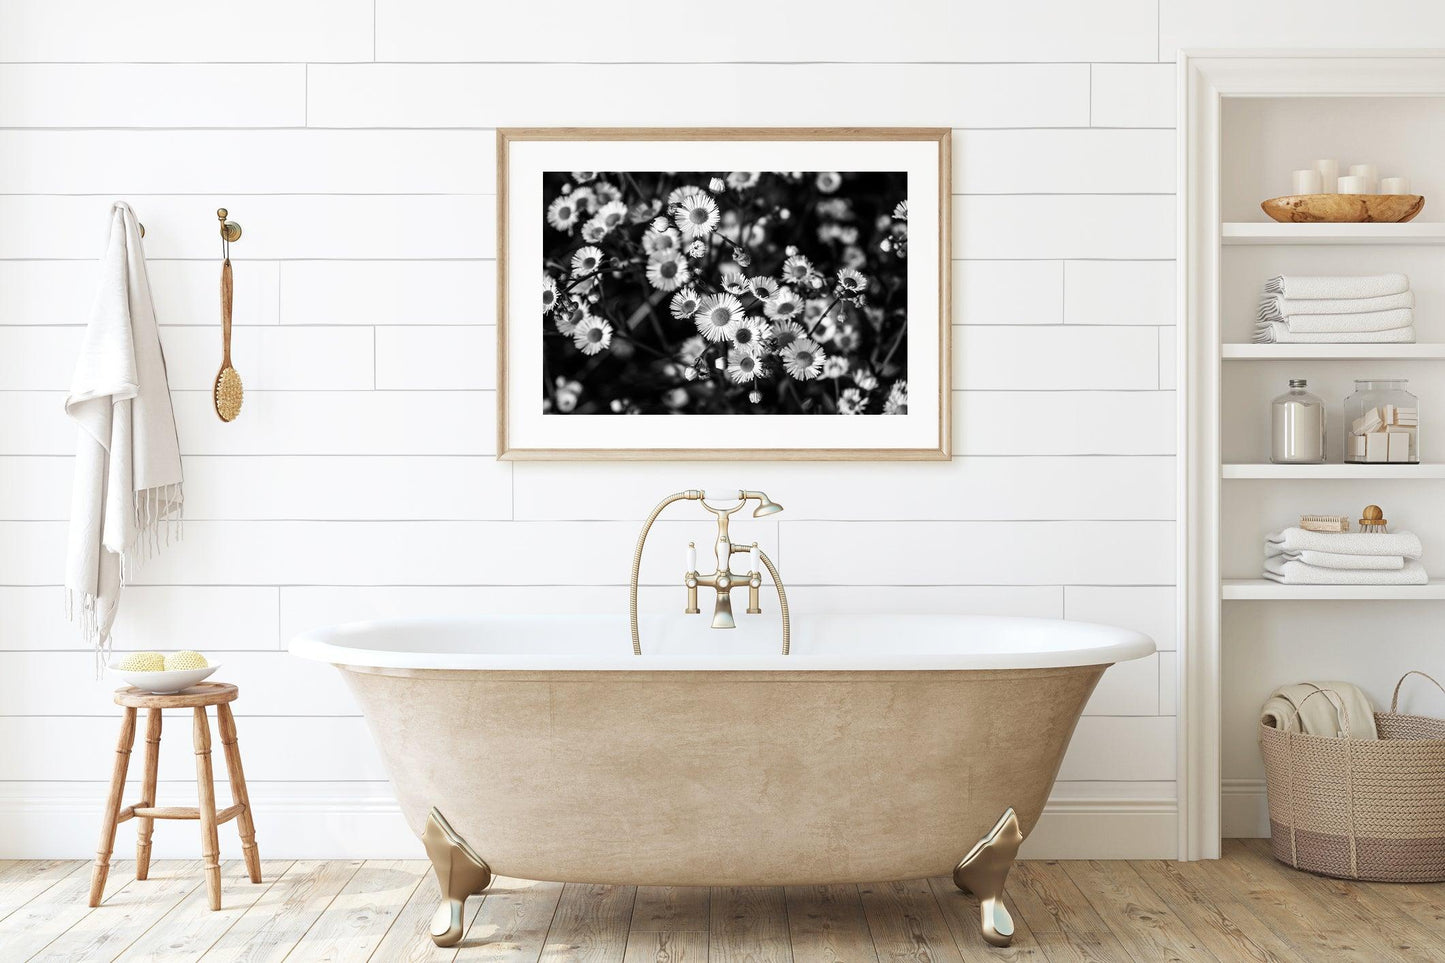 Black and White Daisies Photography | Floral Print - Departures Print Shop